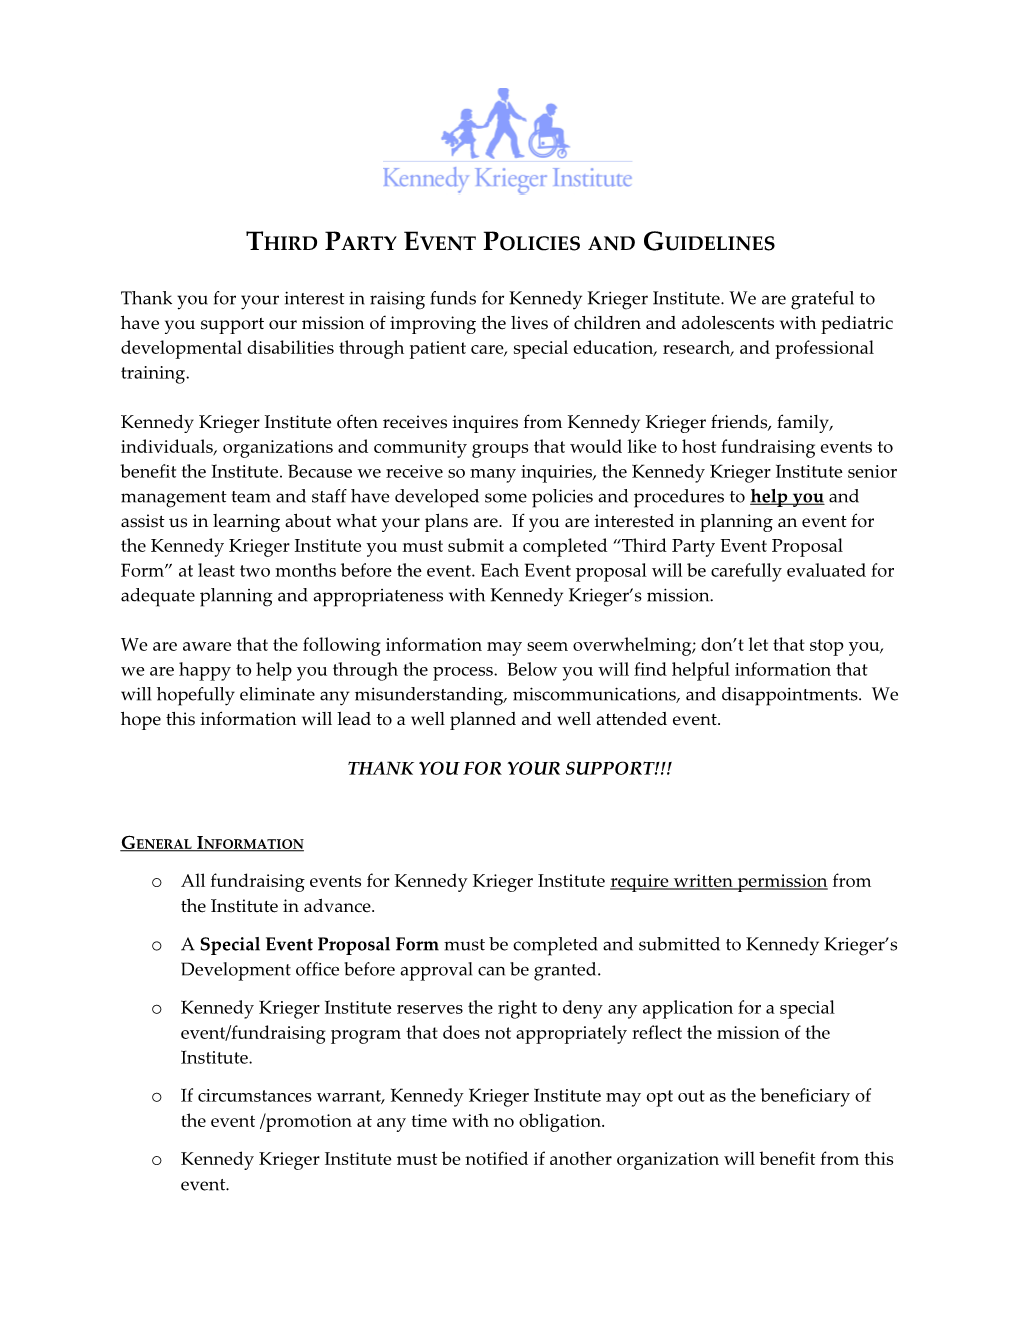 Third Party Event Policies and Guidelines